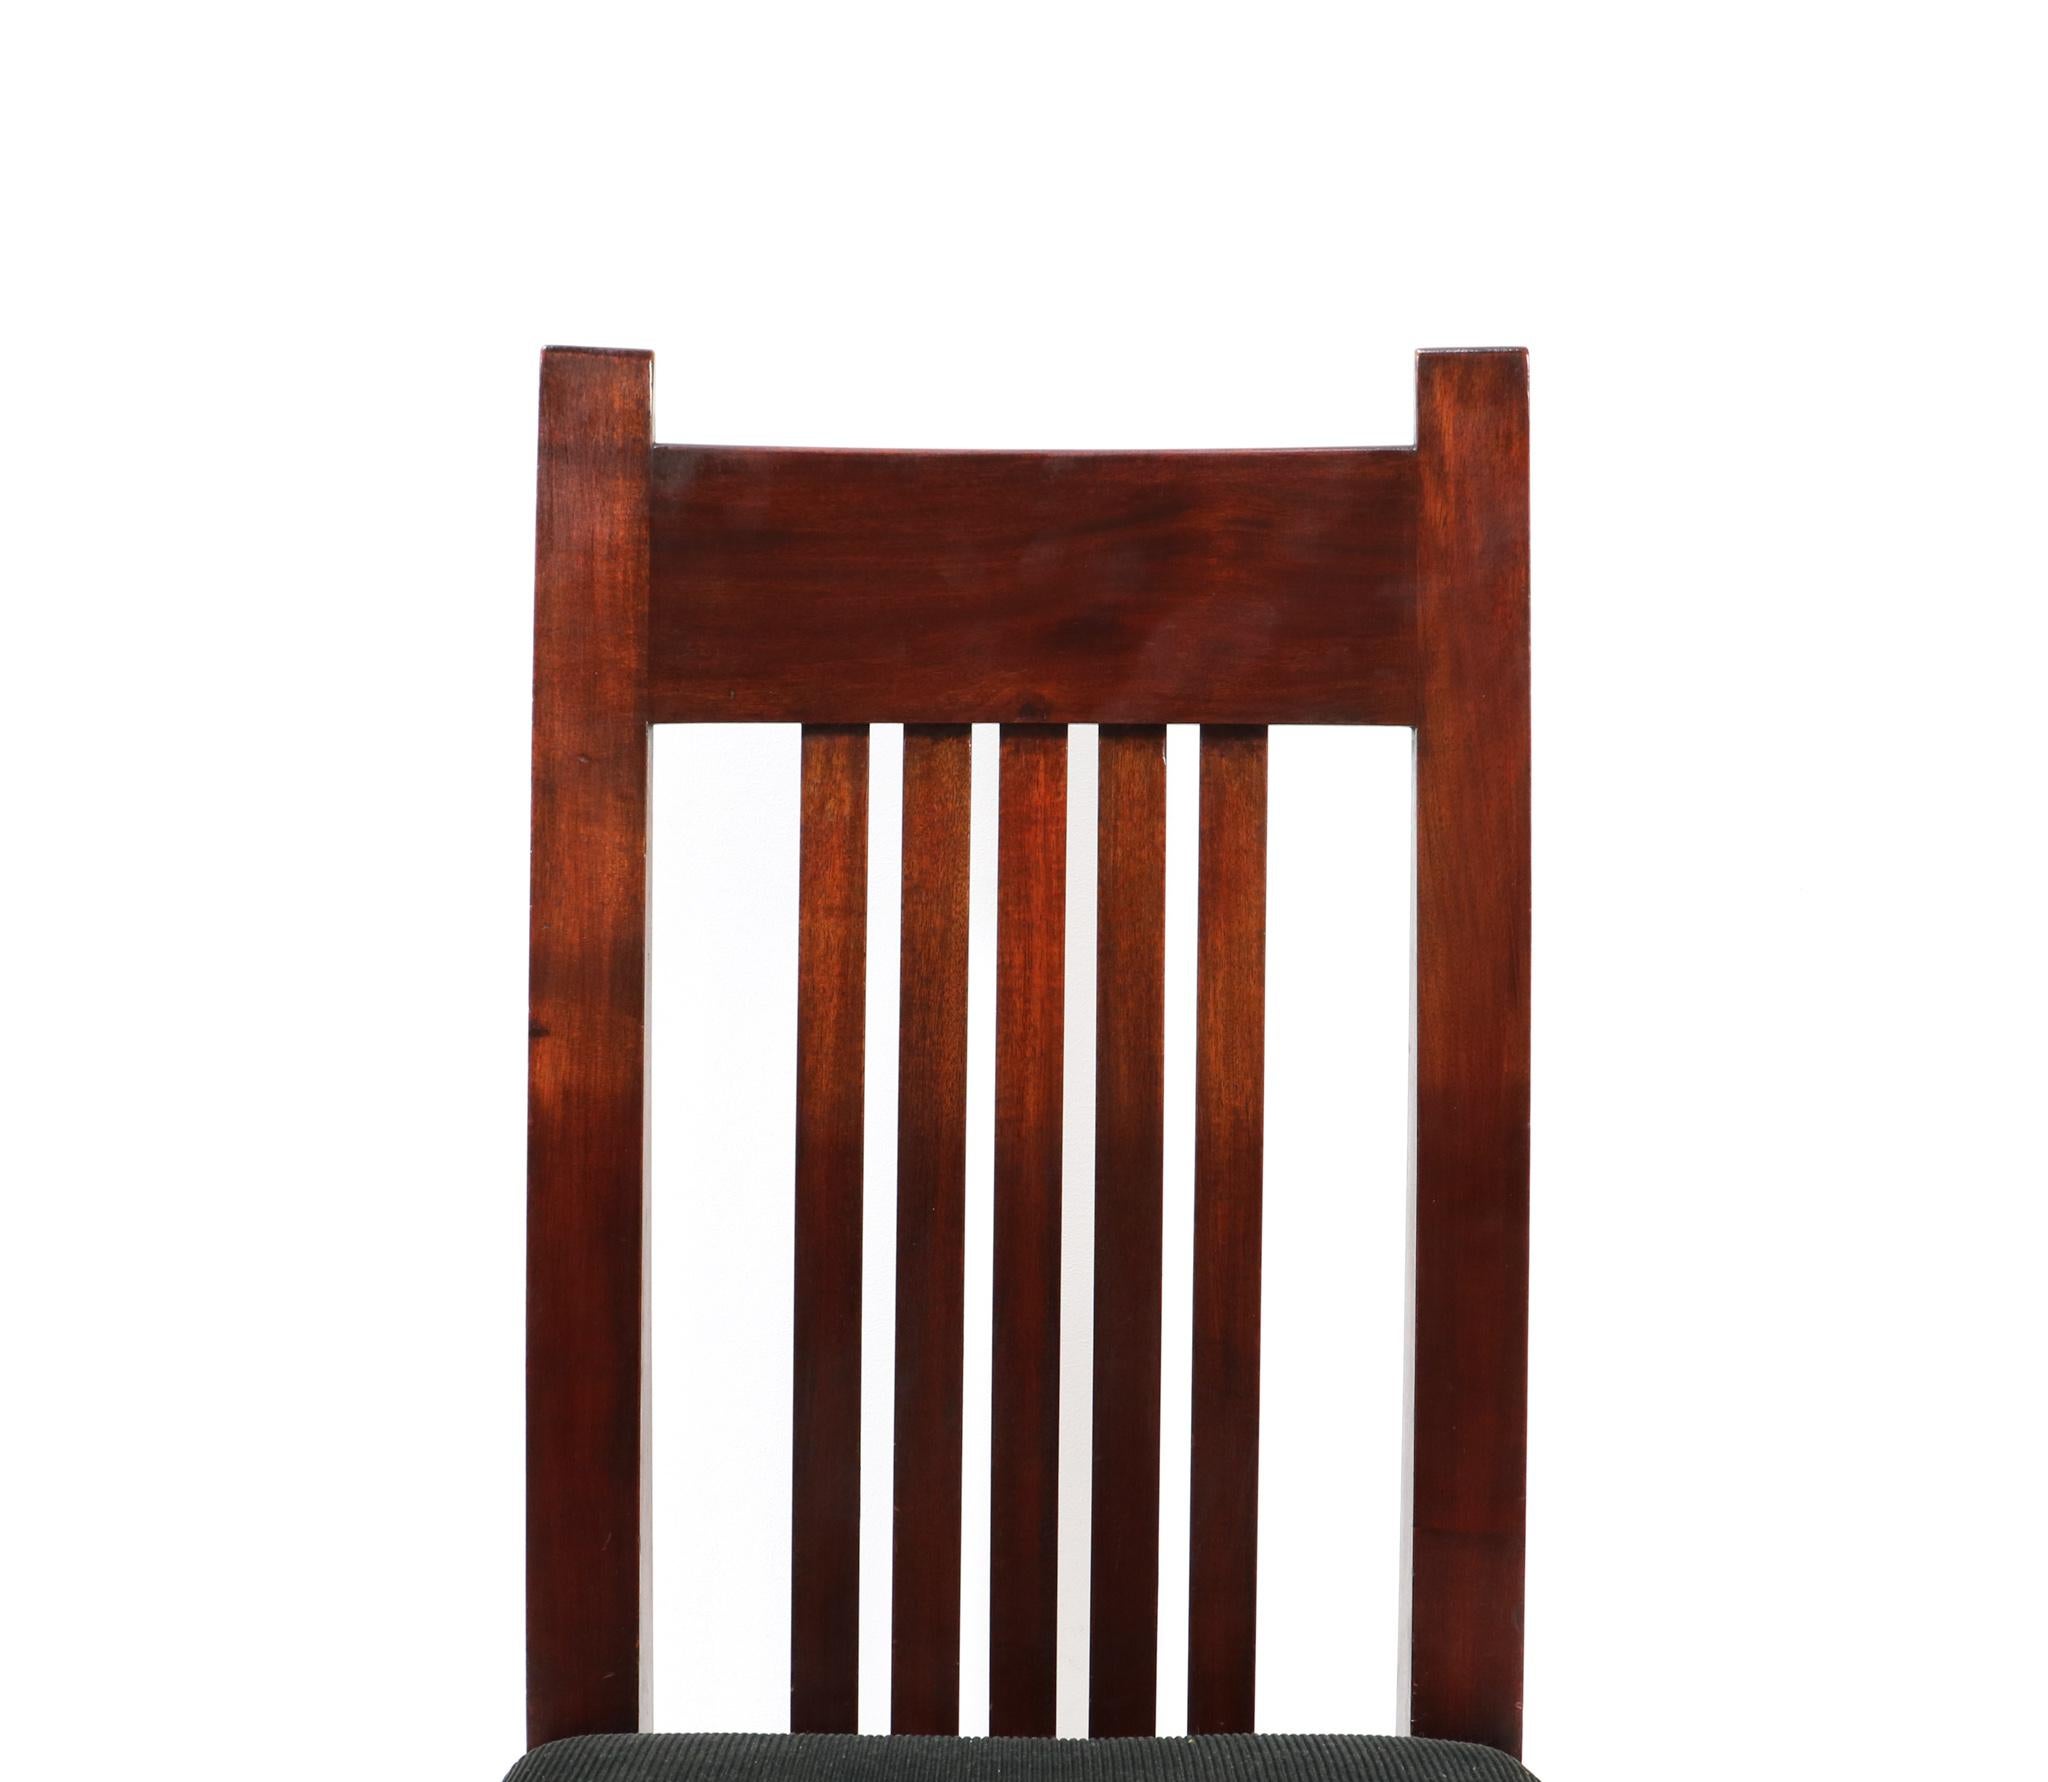 Mahogany Art Deco Modernist High Back Chair by Hendrik Wouda for Pander, 1924 For Sale 2